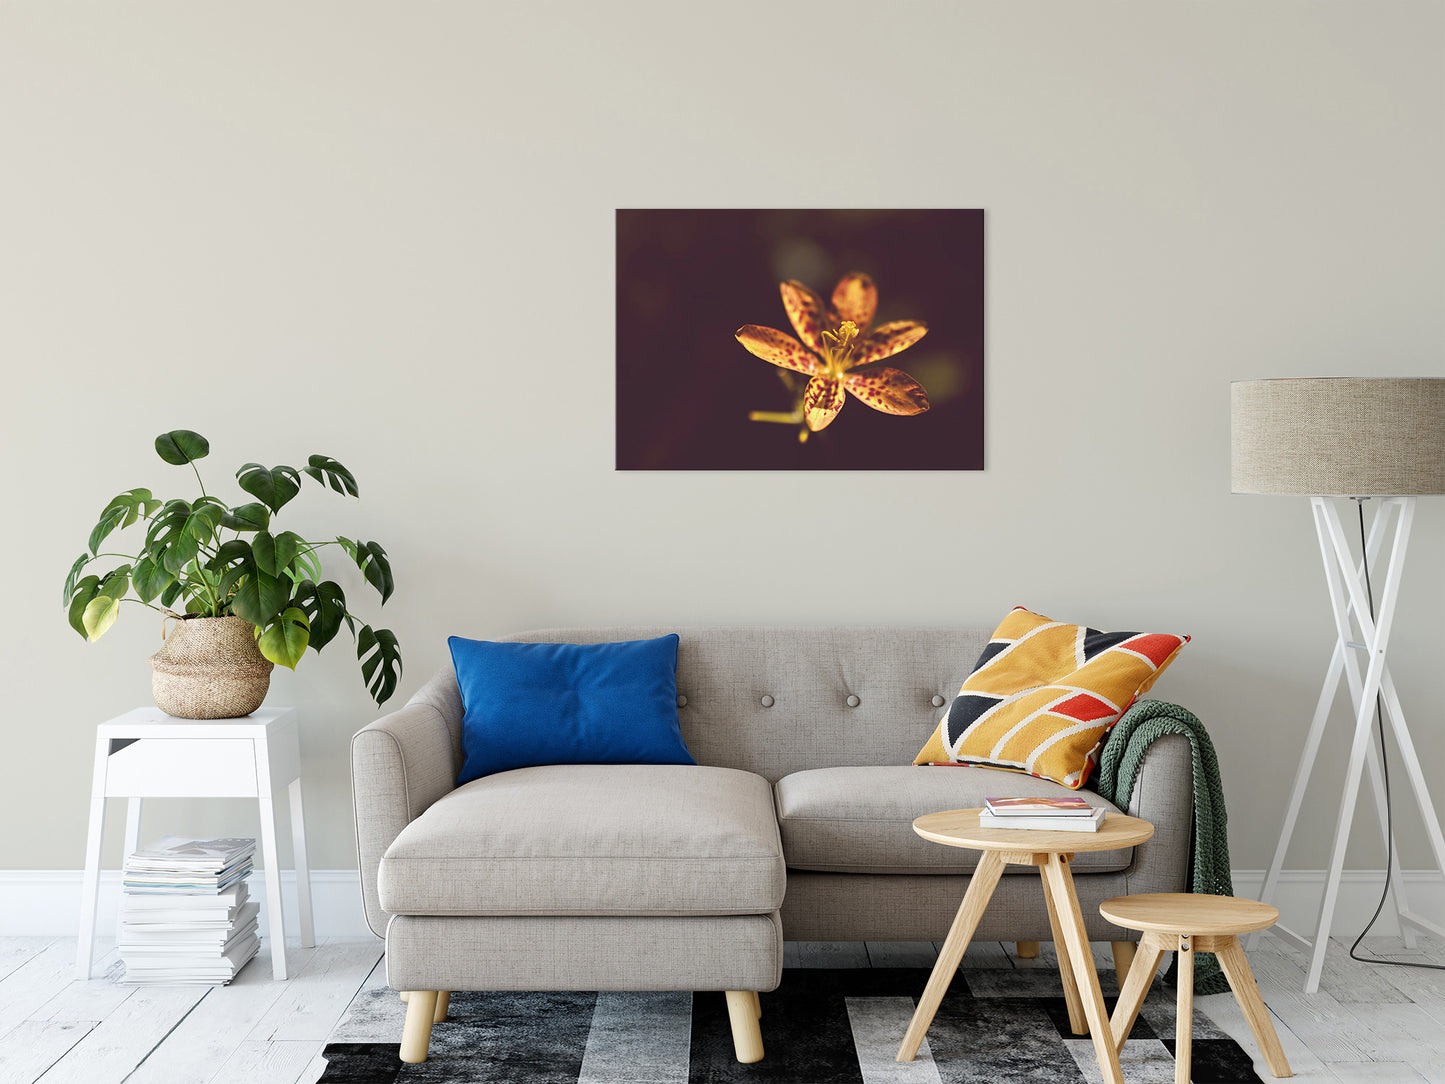 Dramatic Orange Leopard Lily Flower Nature / Floral Photo Fine Art Canvas Wall Art Prints 24" x 36" - PIPAFINEART